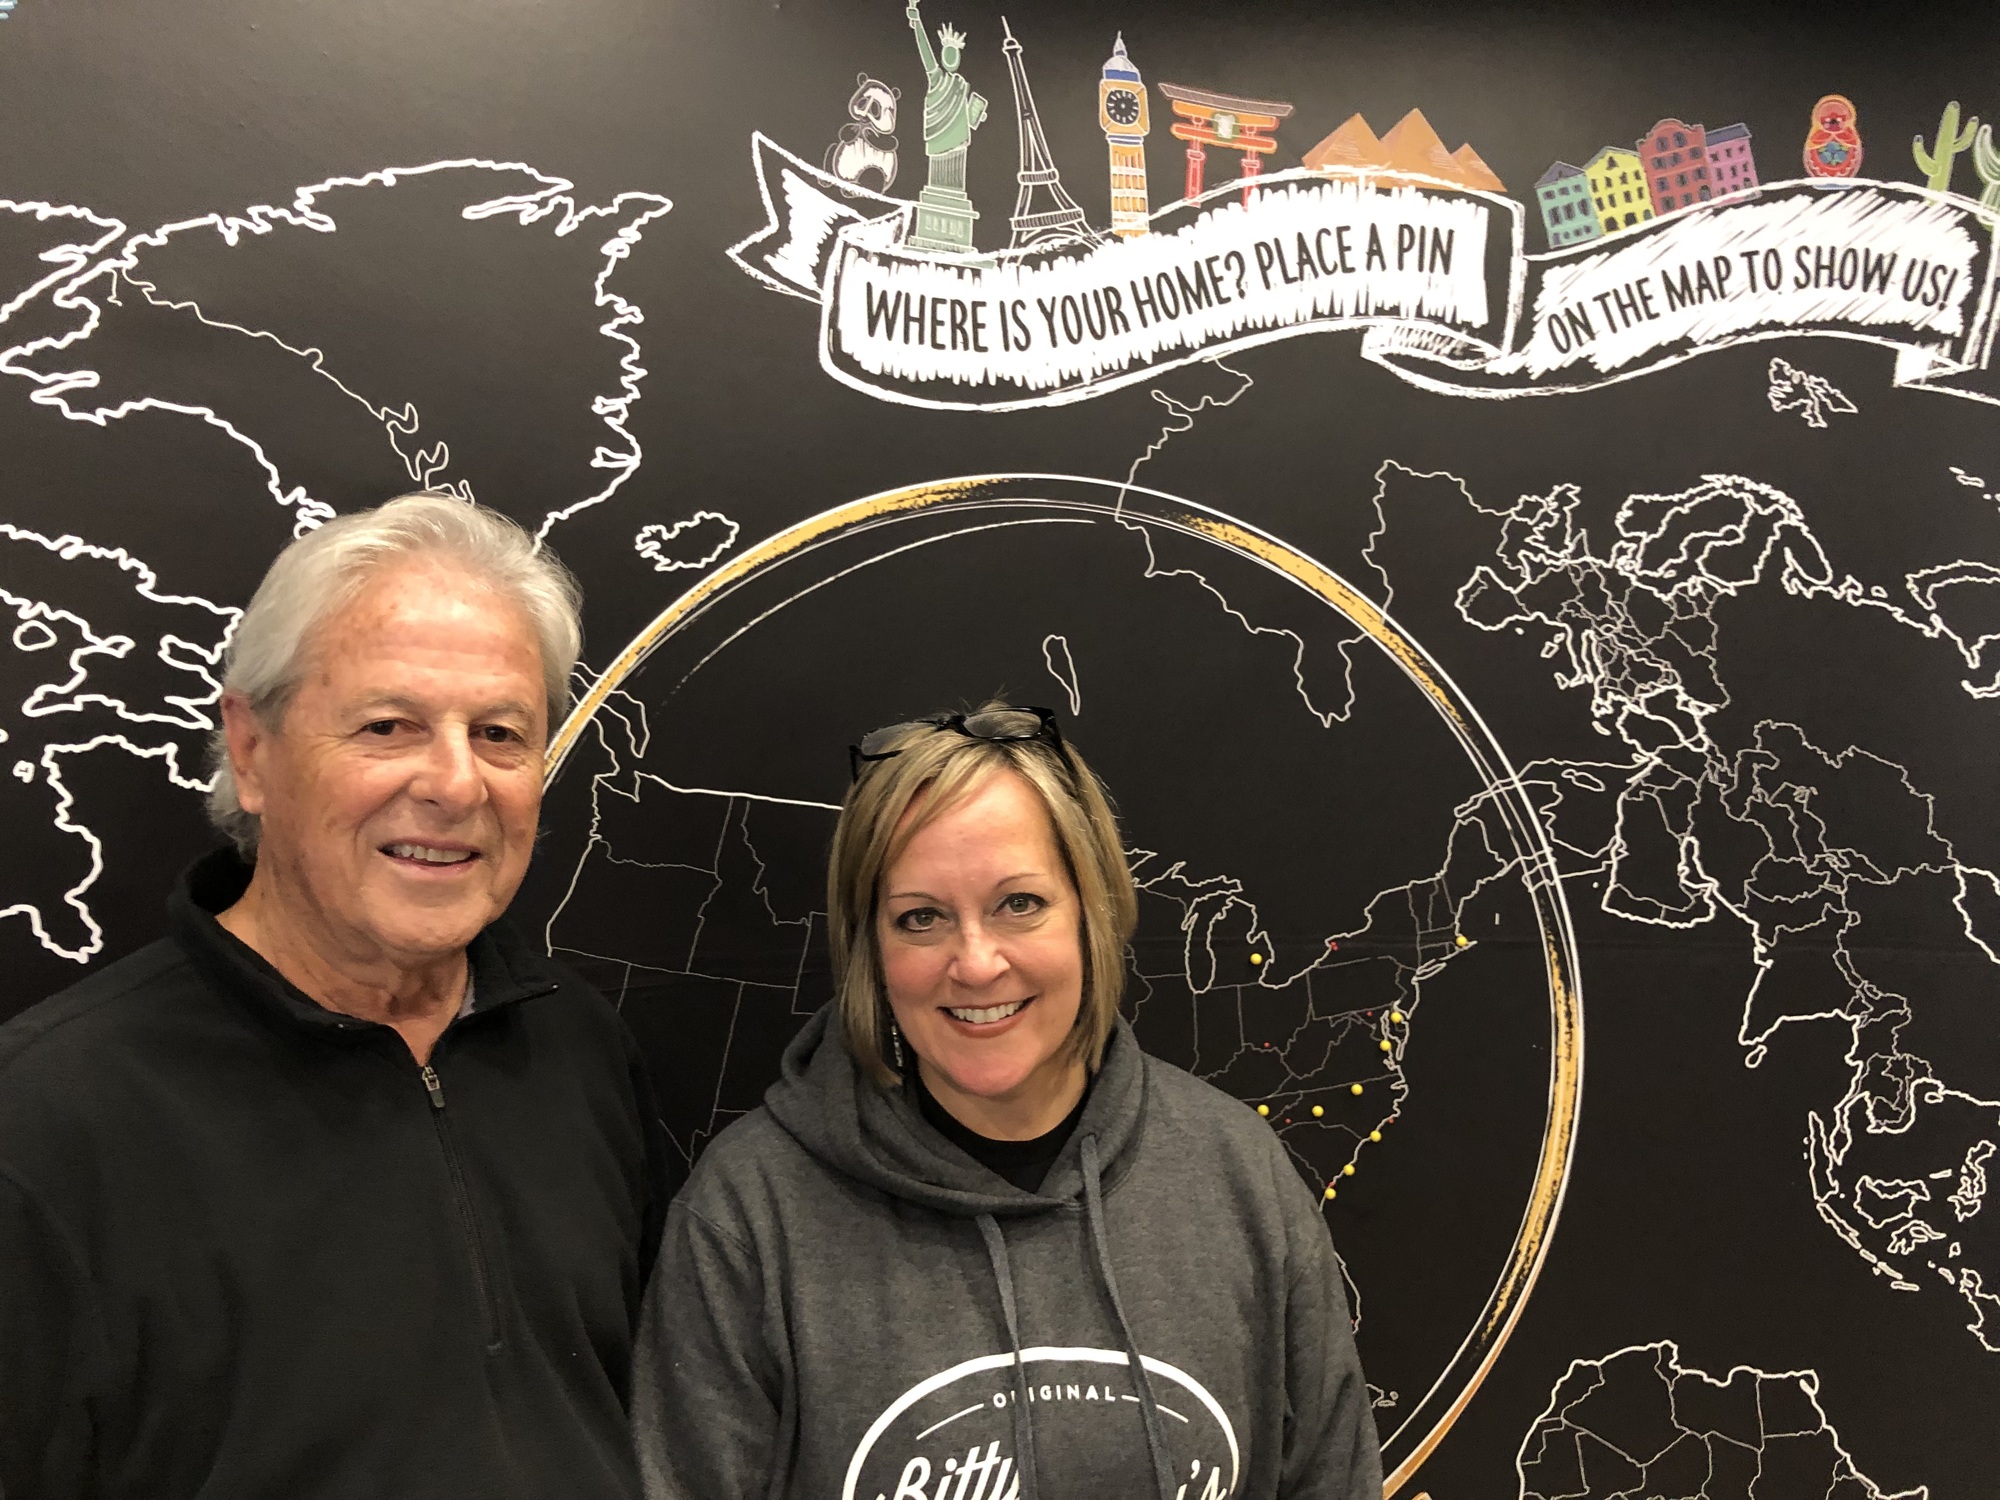 Howard White and Lissie Hurst, owners of the Bitty & Beau’s Coffee franchise location in Jacksonville, stand in front of a map inside the shop that encourages customers to show where they are from.